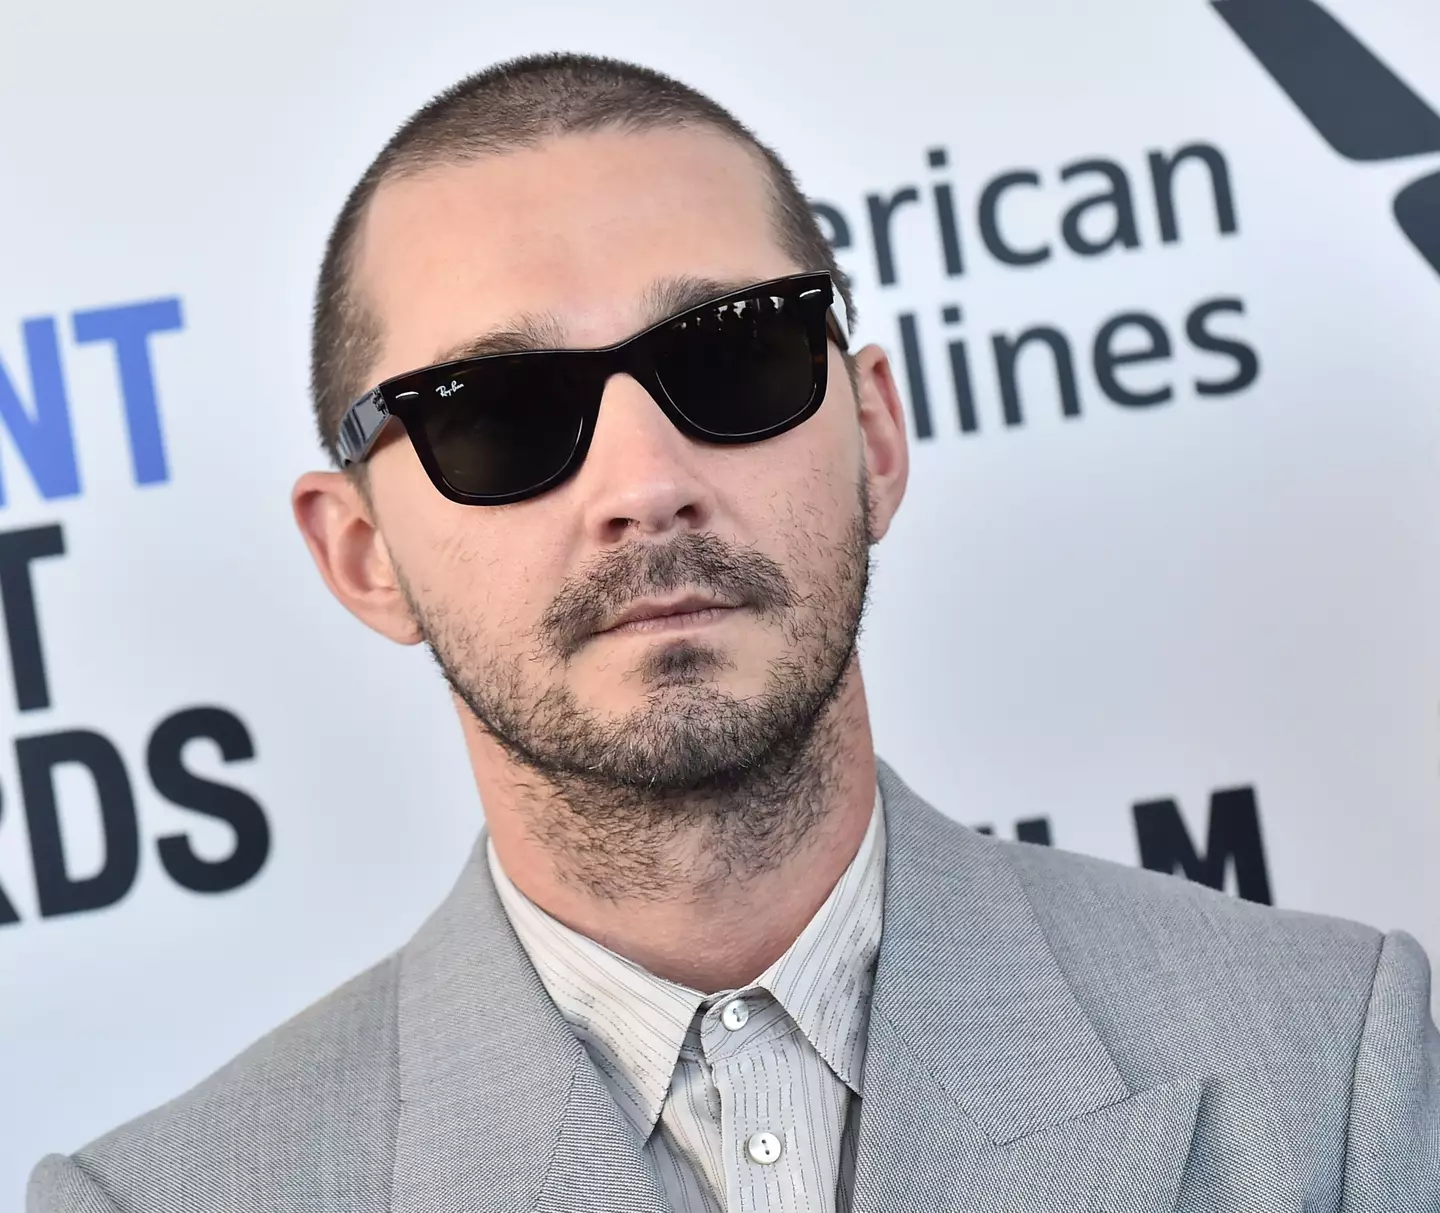 Shia LaBeouf claimed he quit Don't Worry Darling.